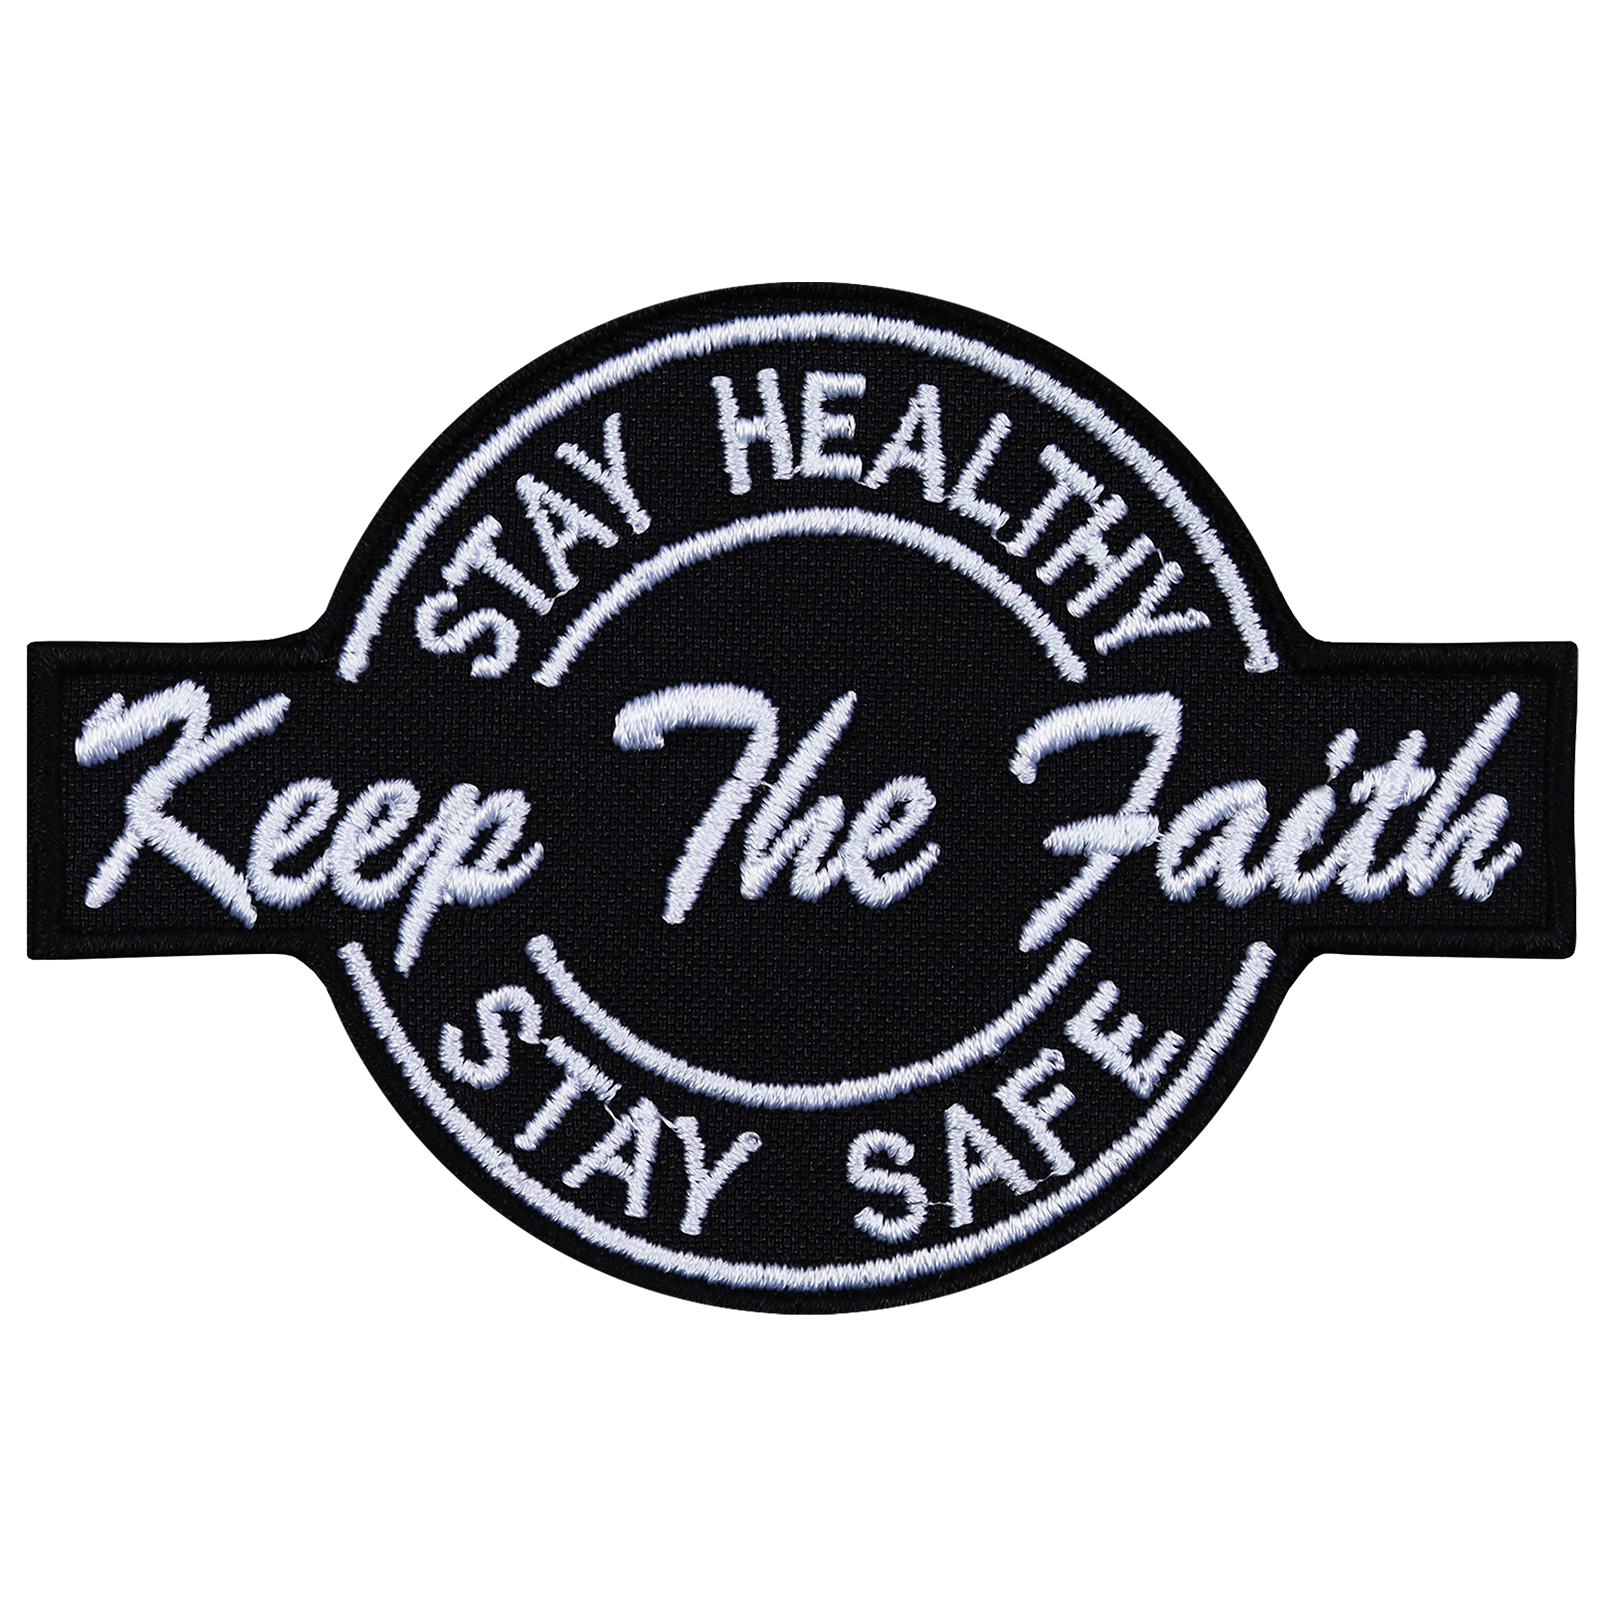 Stay healthy - Stay safe - Keep the faith - Patch